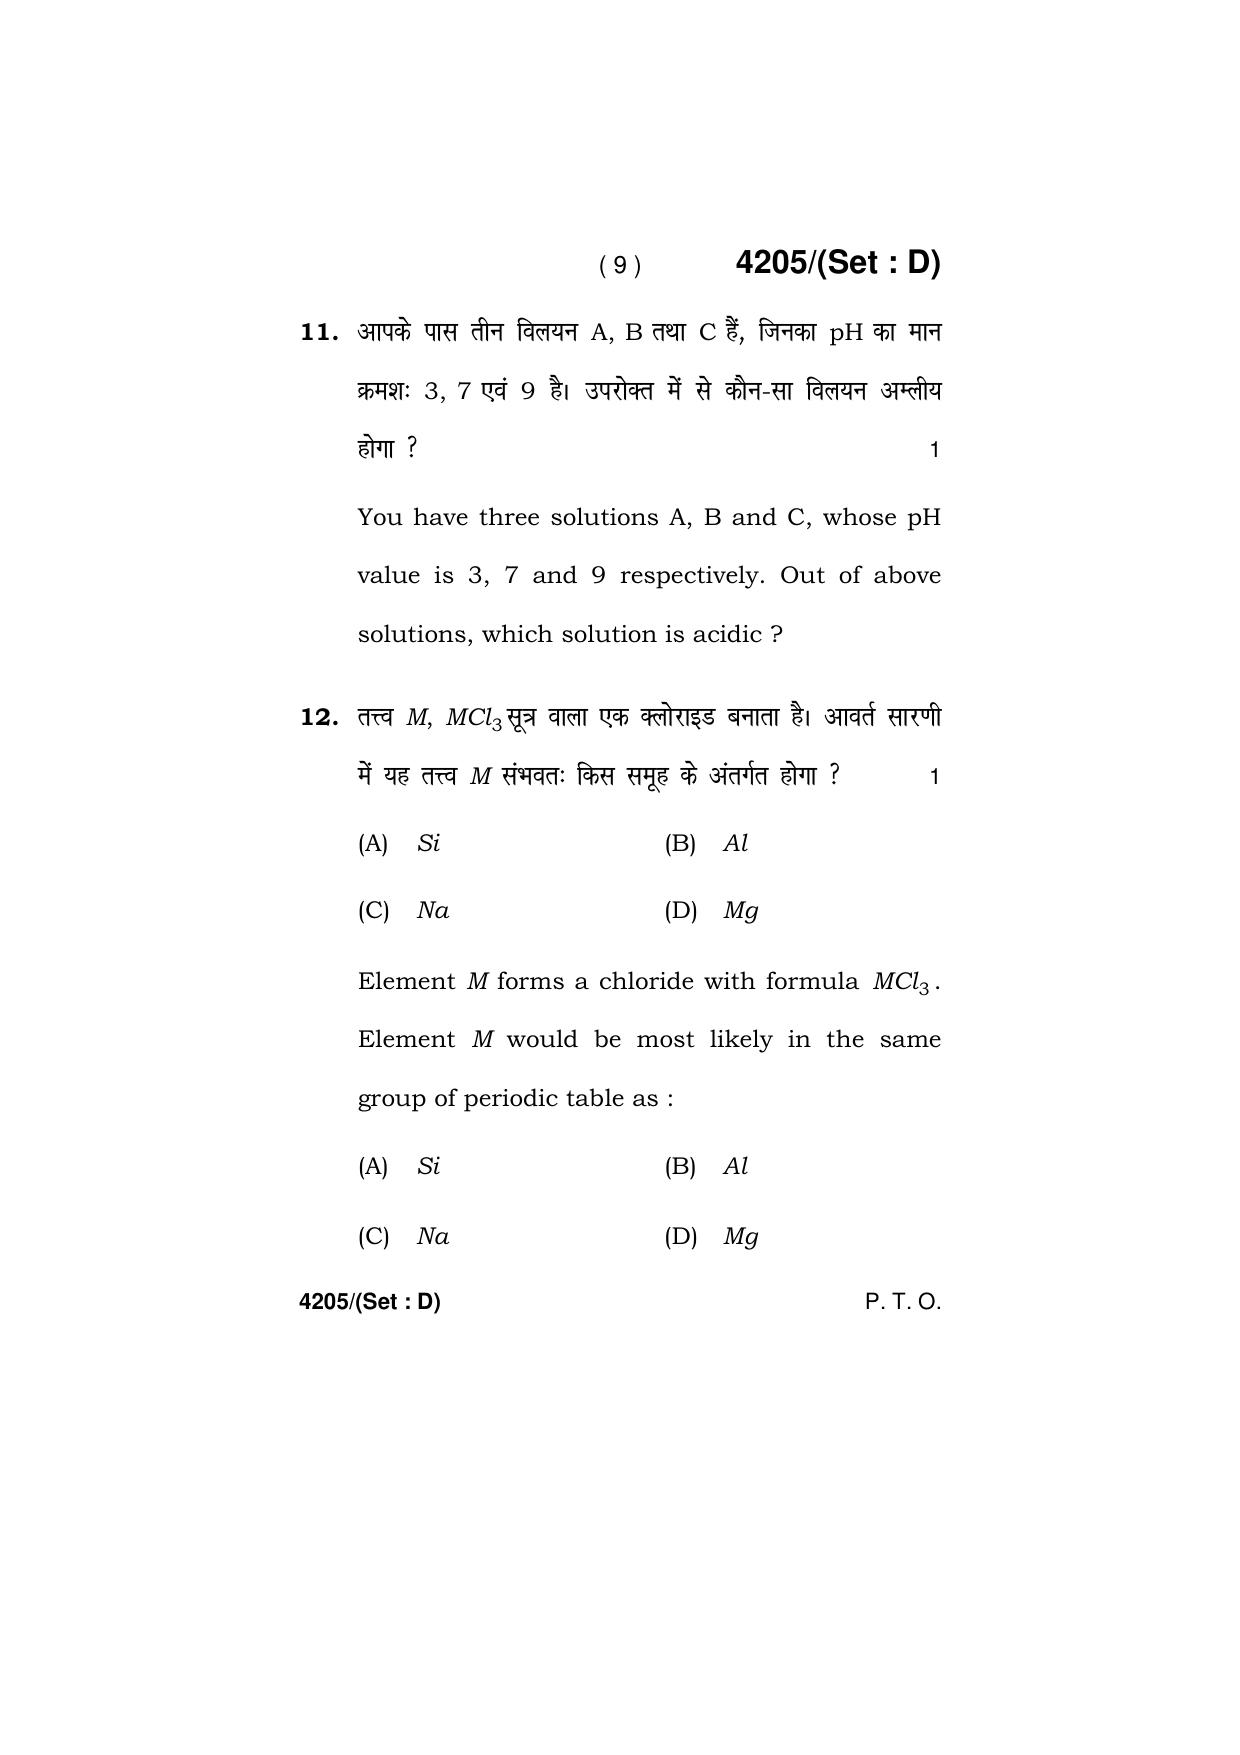 Haryana Board HBSE Class 10 Science (All Set) 2019 Question Paper - Page 57